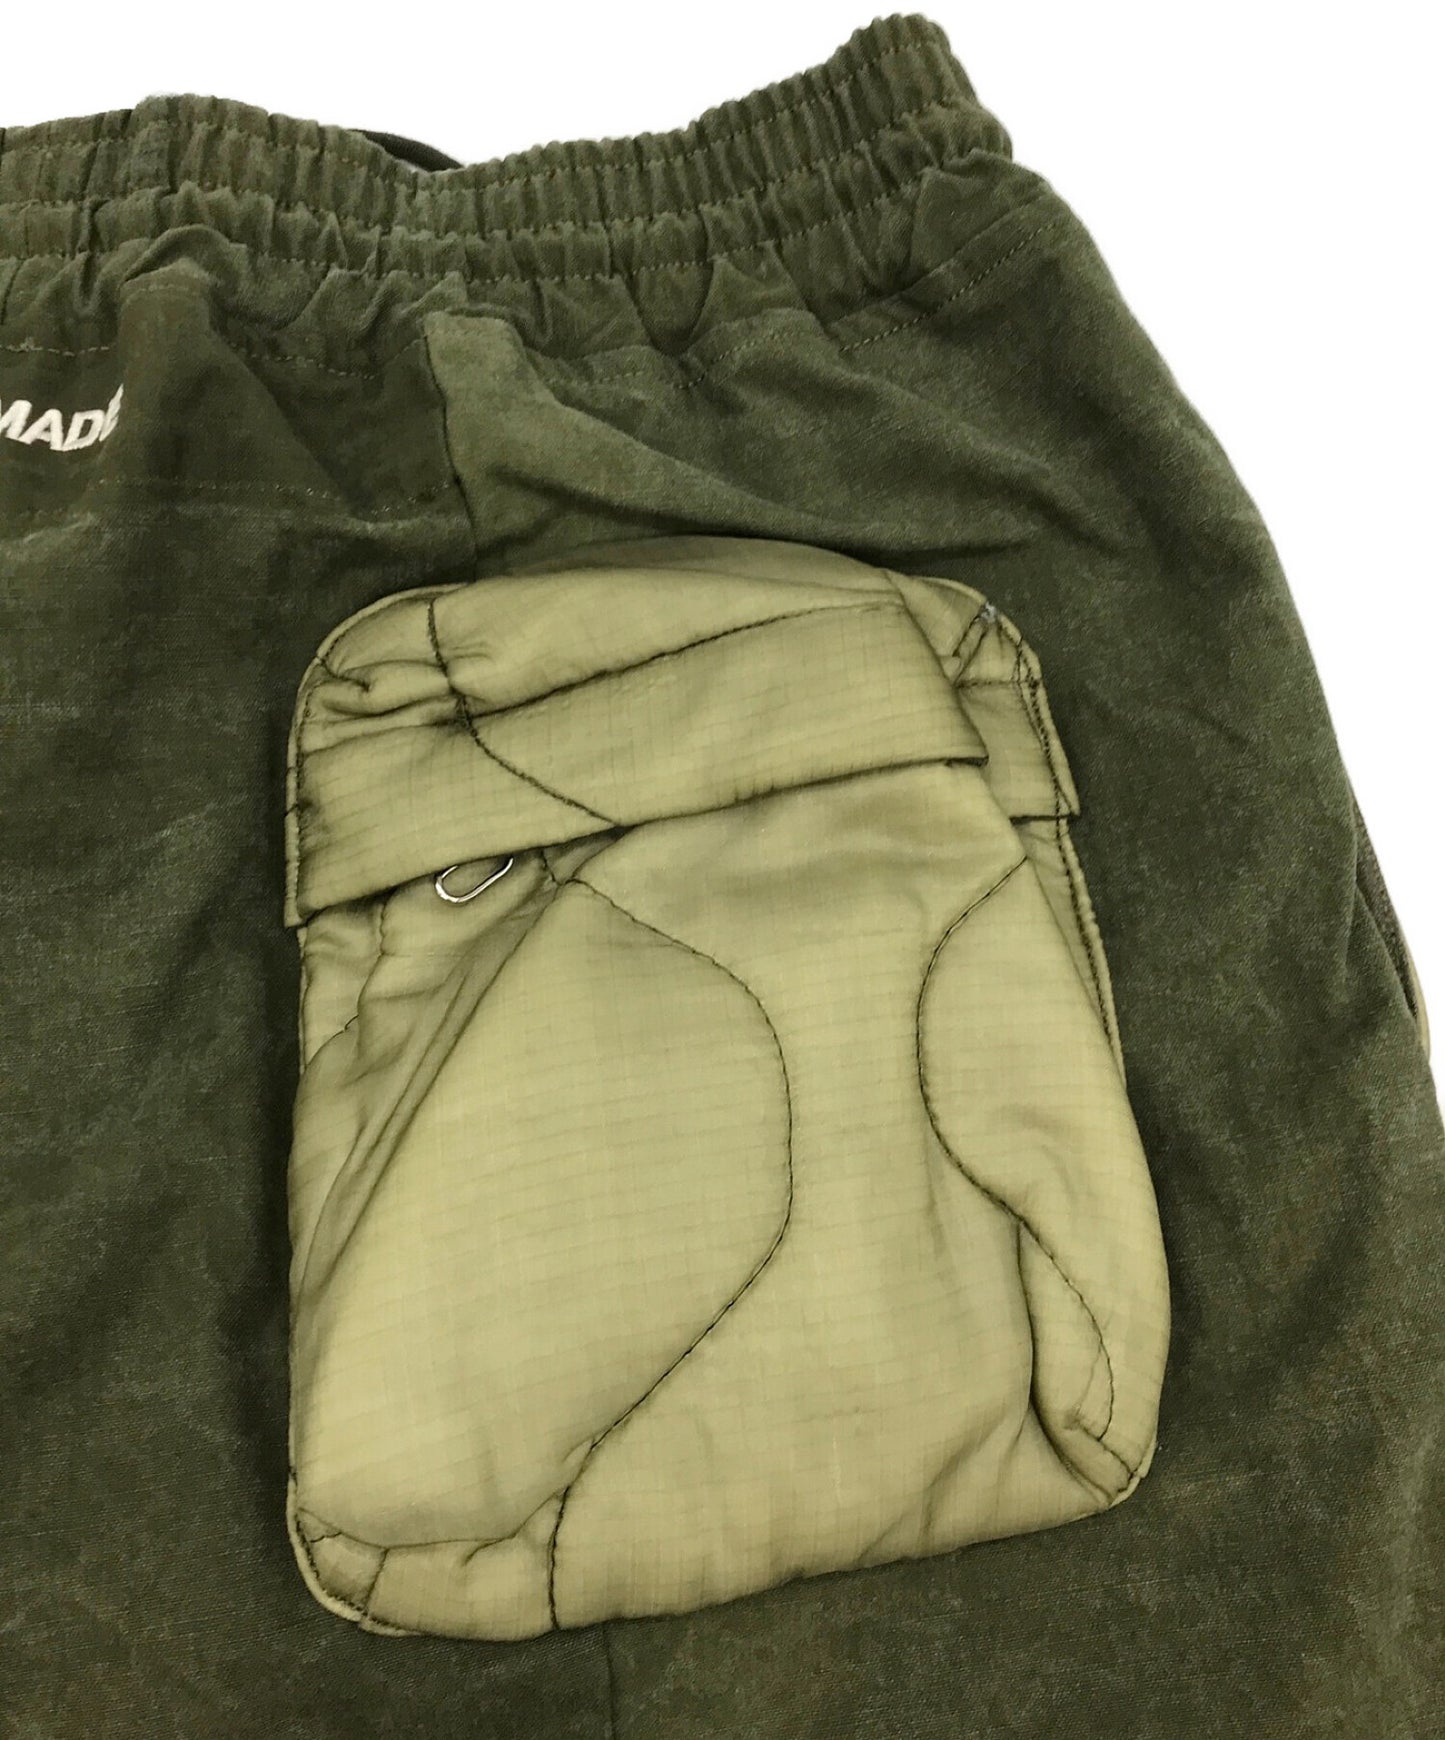 [Pre-owned] READYMADE Liner Tactical Pants Pants RE-CO-KH-00-00-115